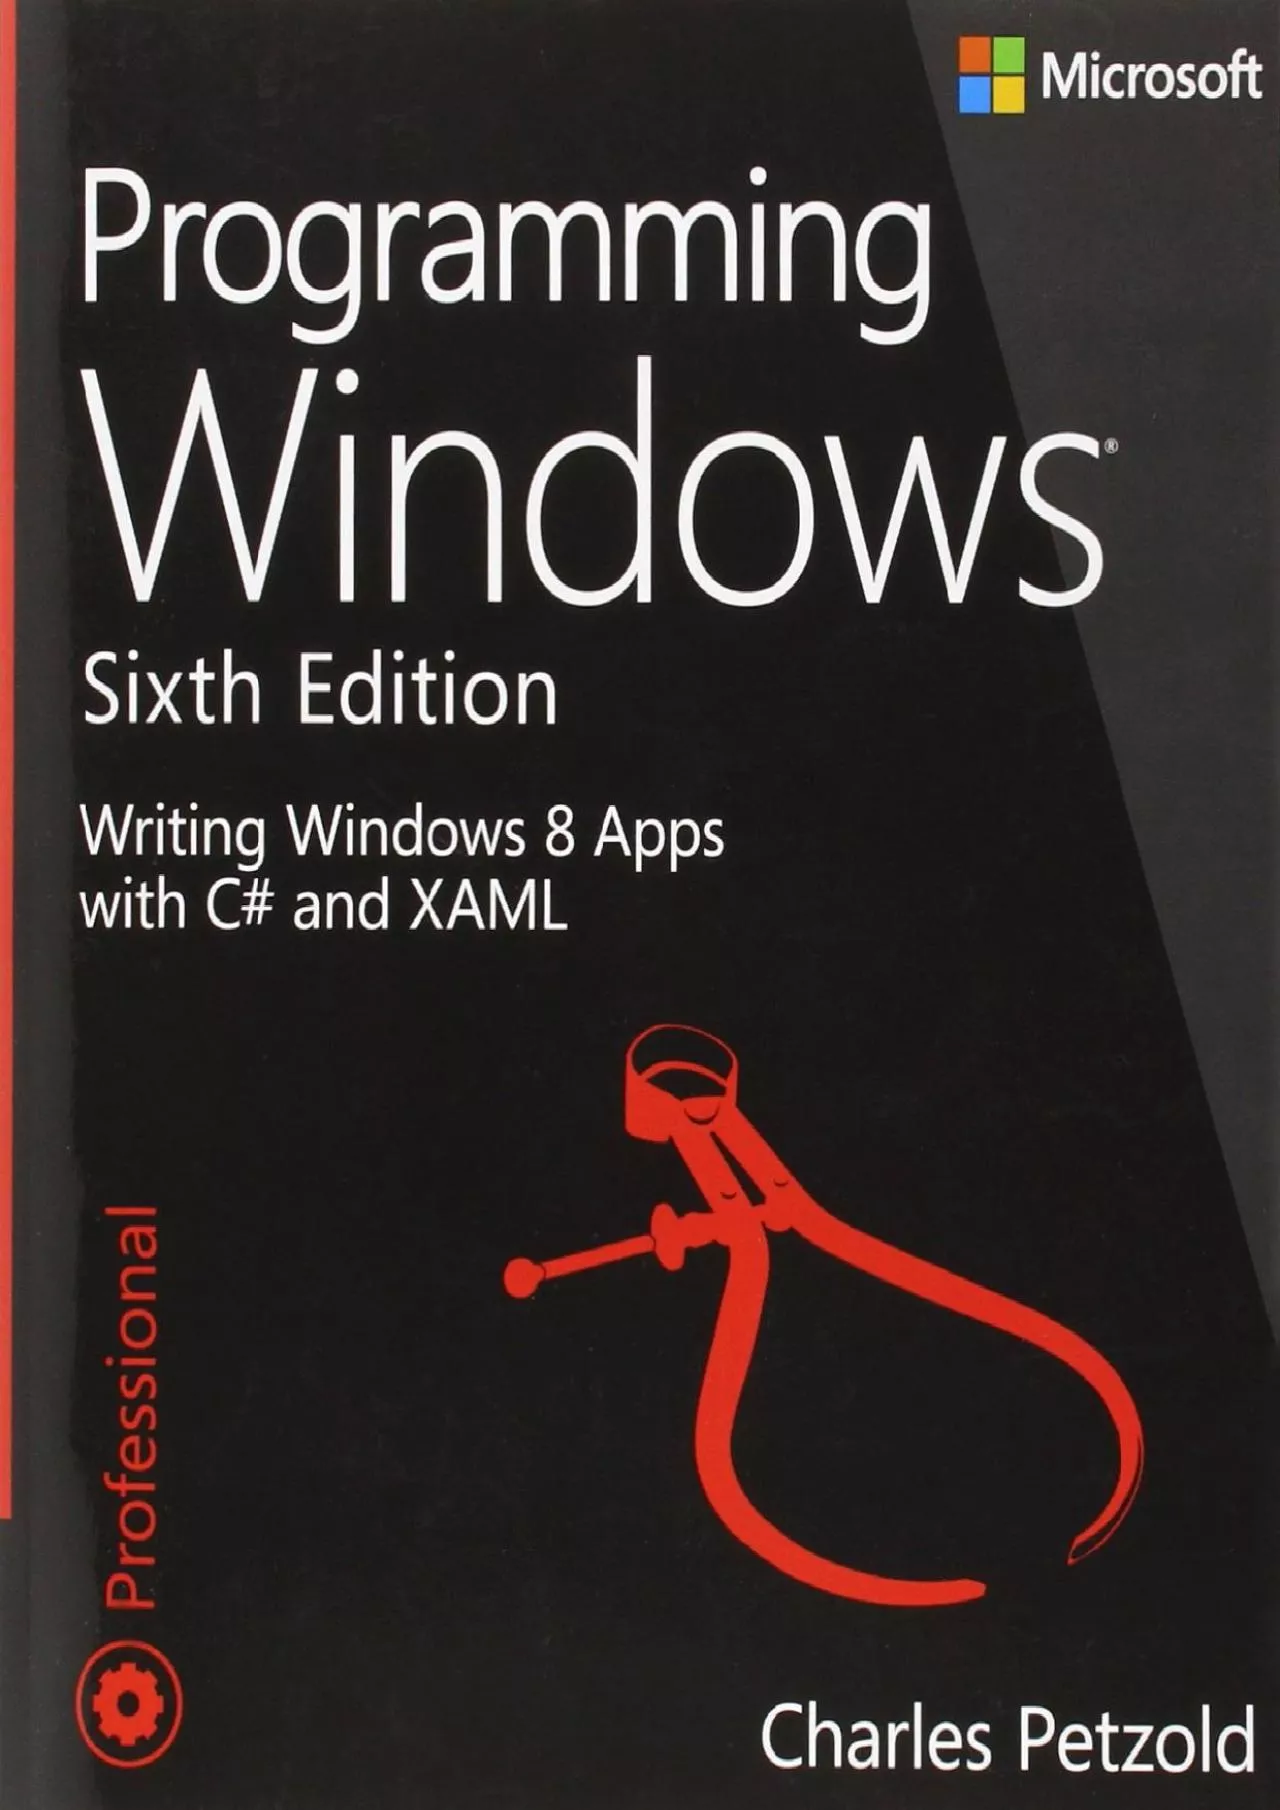 [READING BOOK]-Programming Windows: Writing Windows 8 Apps With C and XAML (Developer